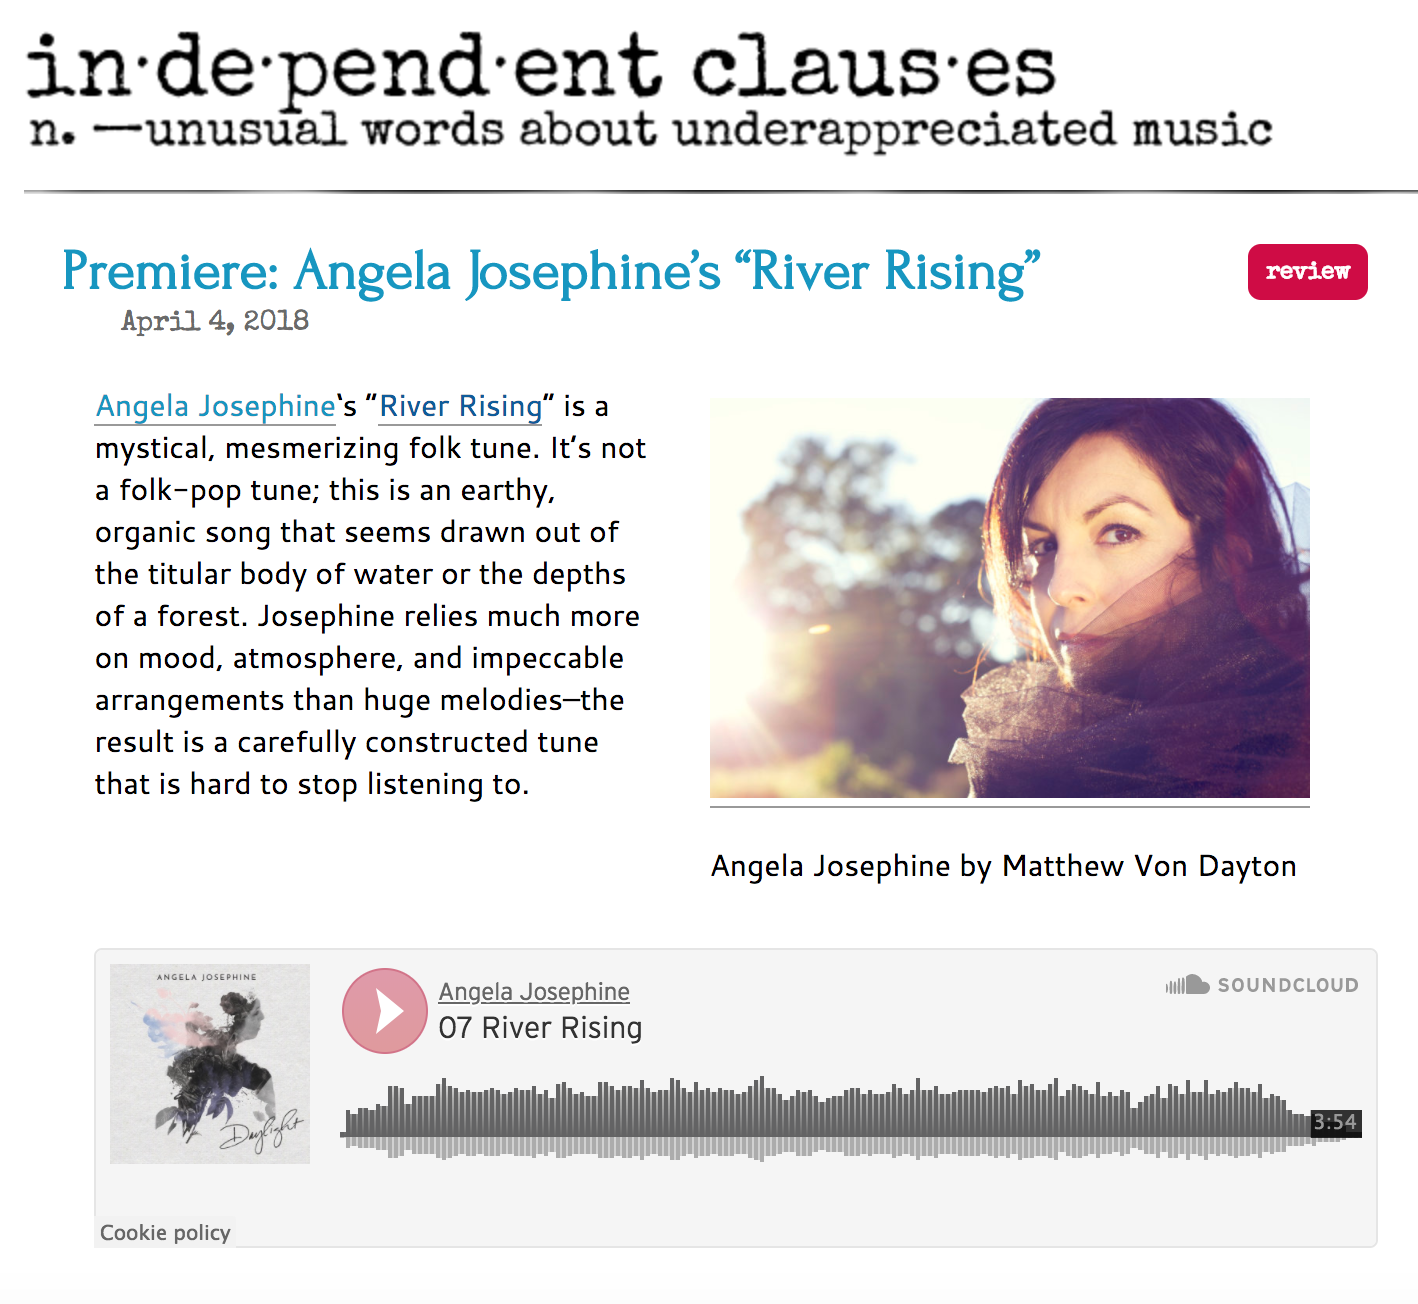 Angela Josephine - River Rising Premiere at Independent Clauses